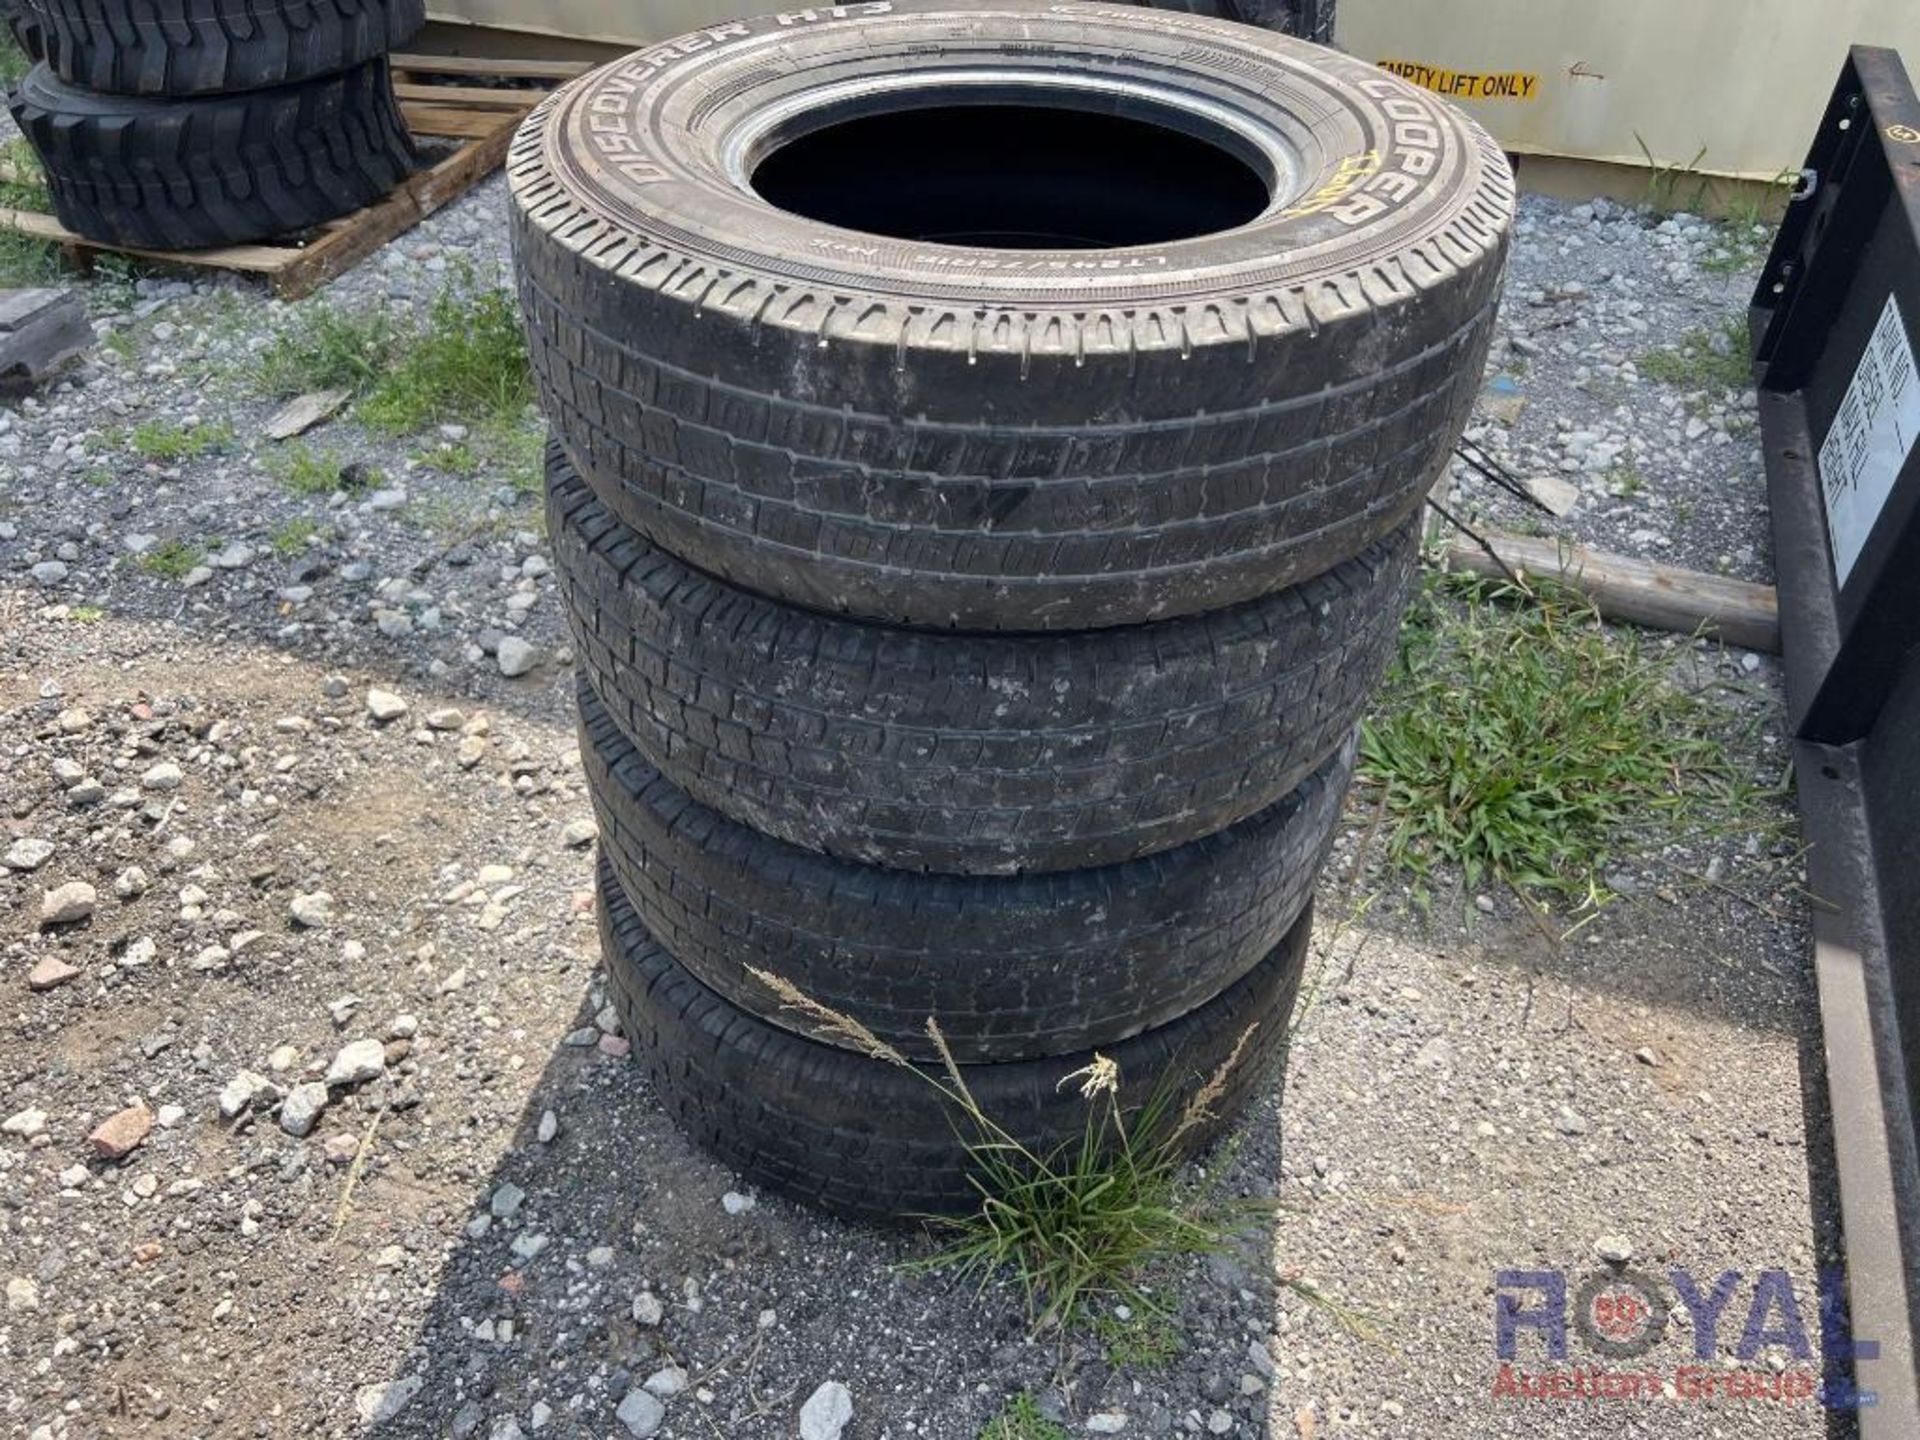 Set of Four Used Cooper Discovery HT3 LT245/75R16 Tires - Image 2 of 7